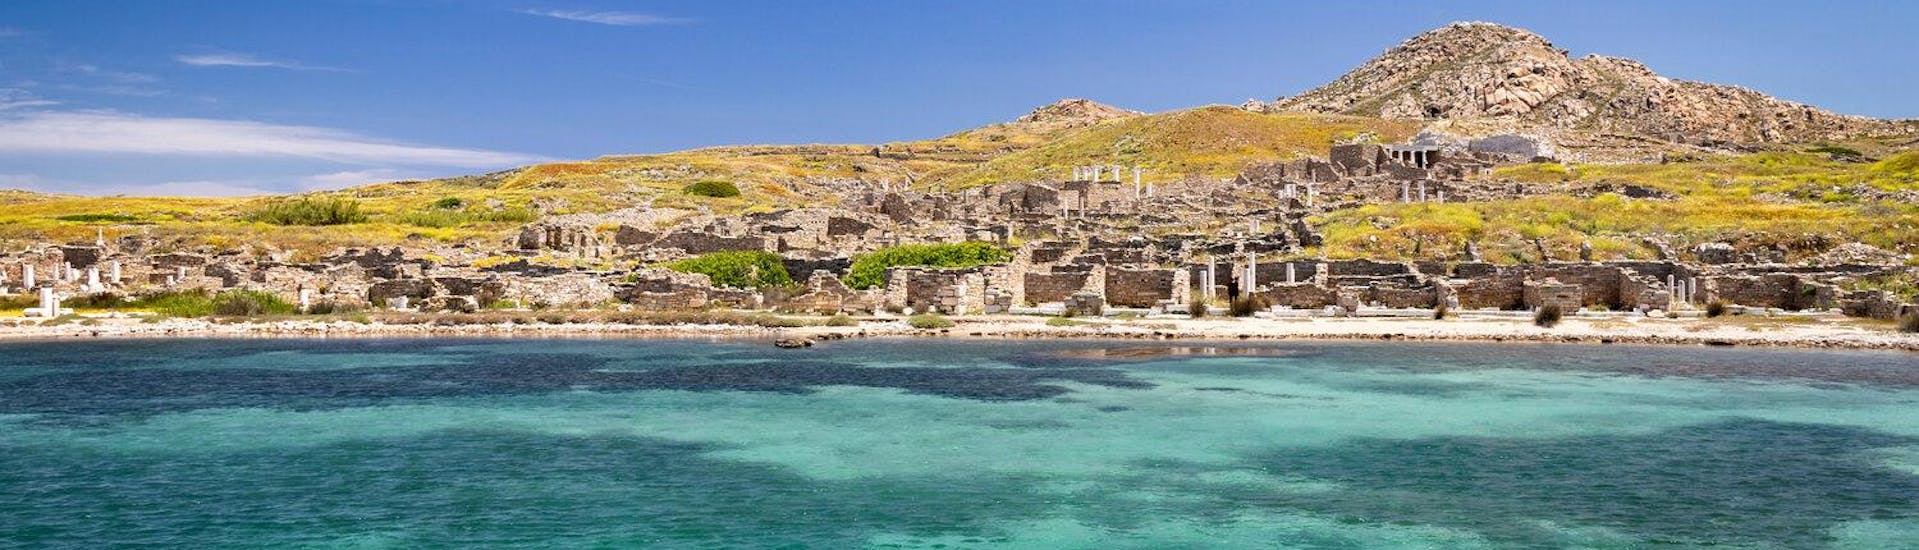 View of the island during a boat trip to Delos.